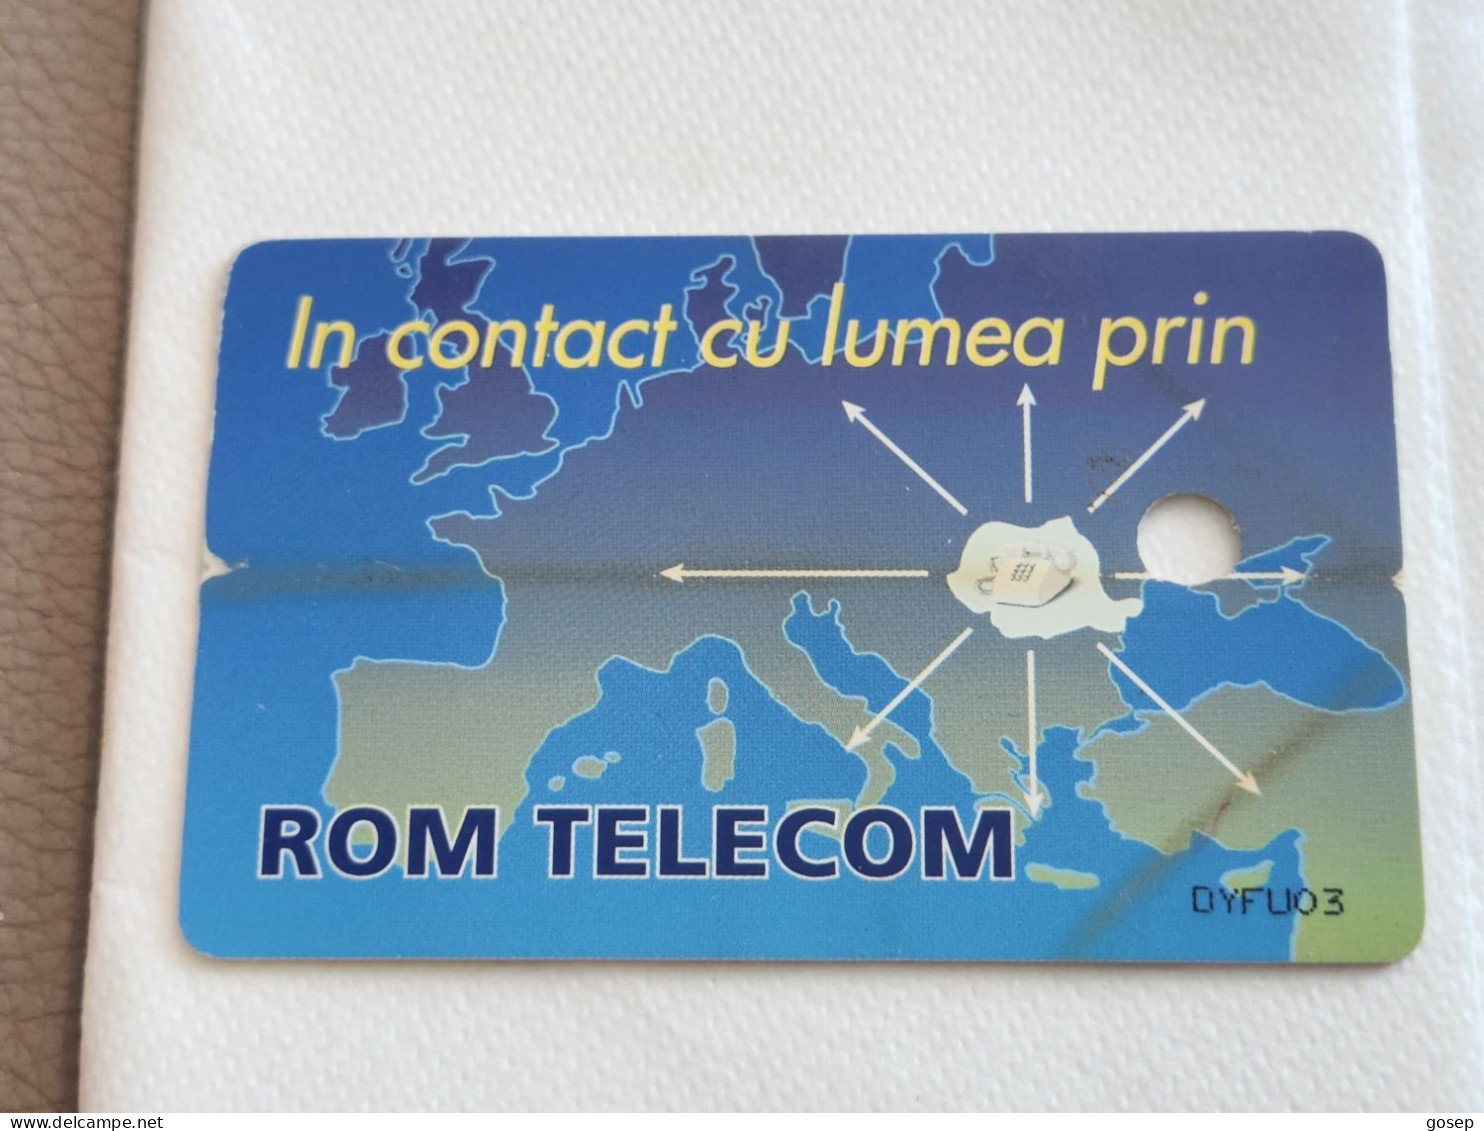 ROMANIA-(RO-ROM-0018A)-Abstract Design-(1996)-NO CHIP-(61)-(20.000 Lei)-(DYFUO3)-used Card+1card Prepiad Free - Roemenië